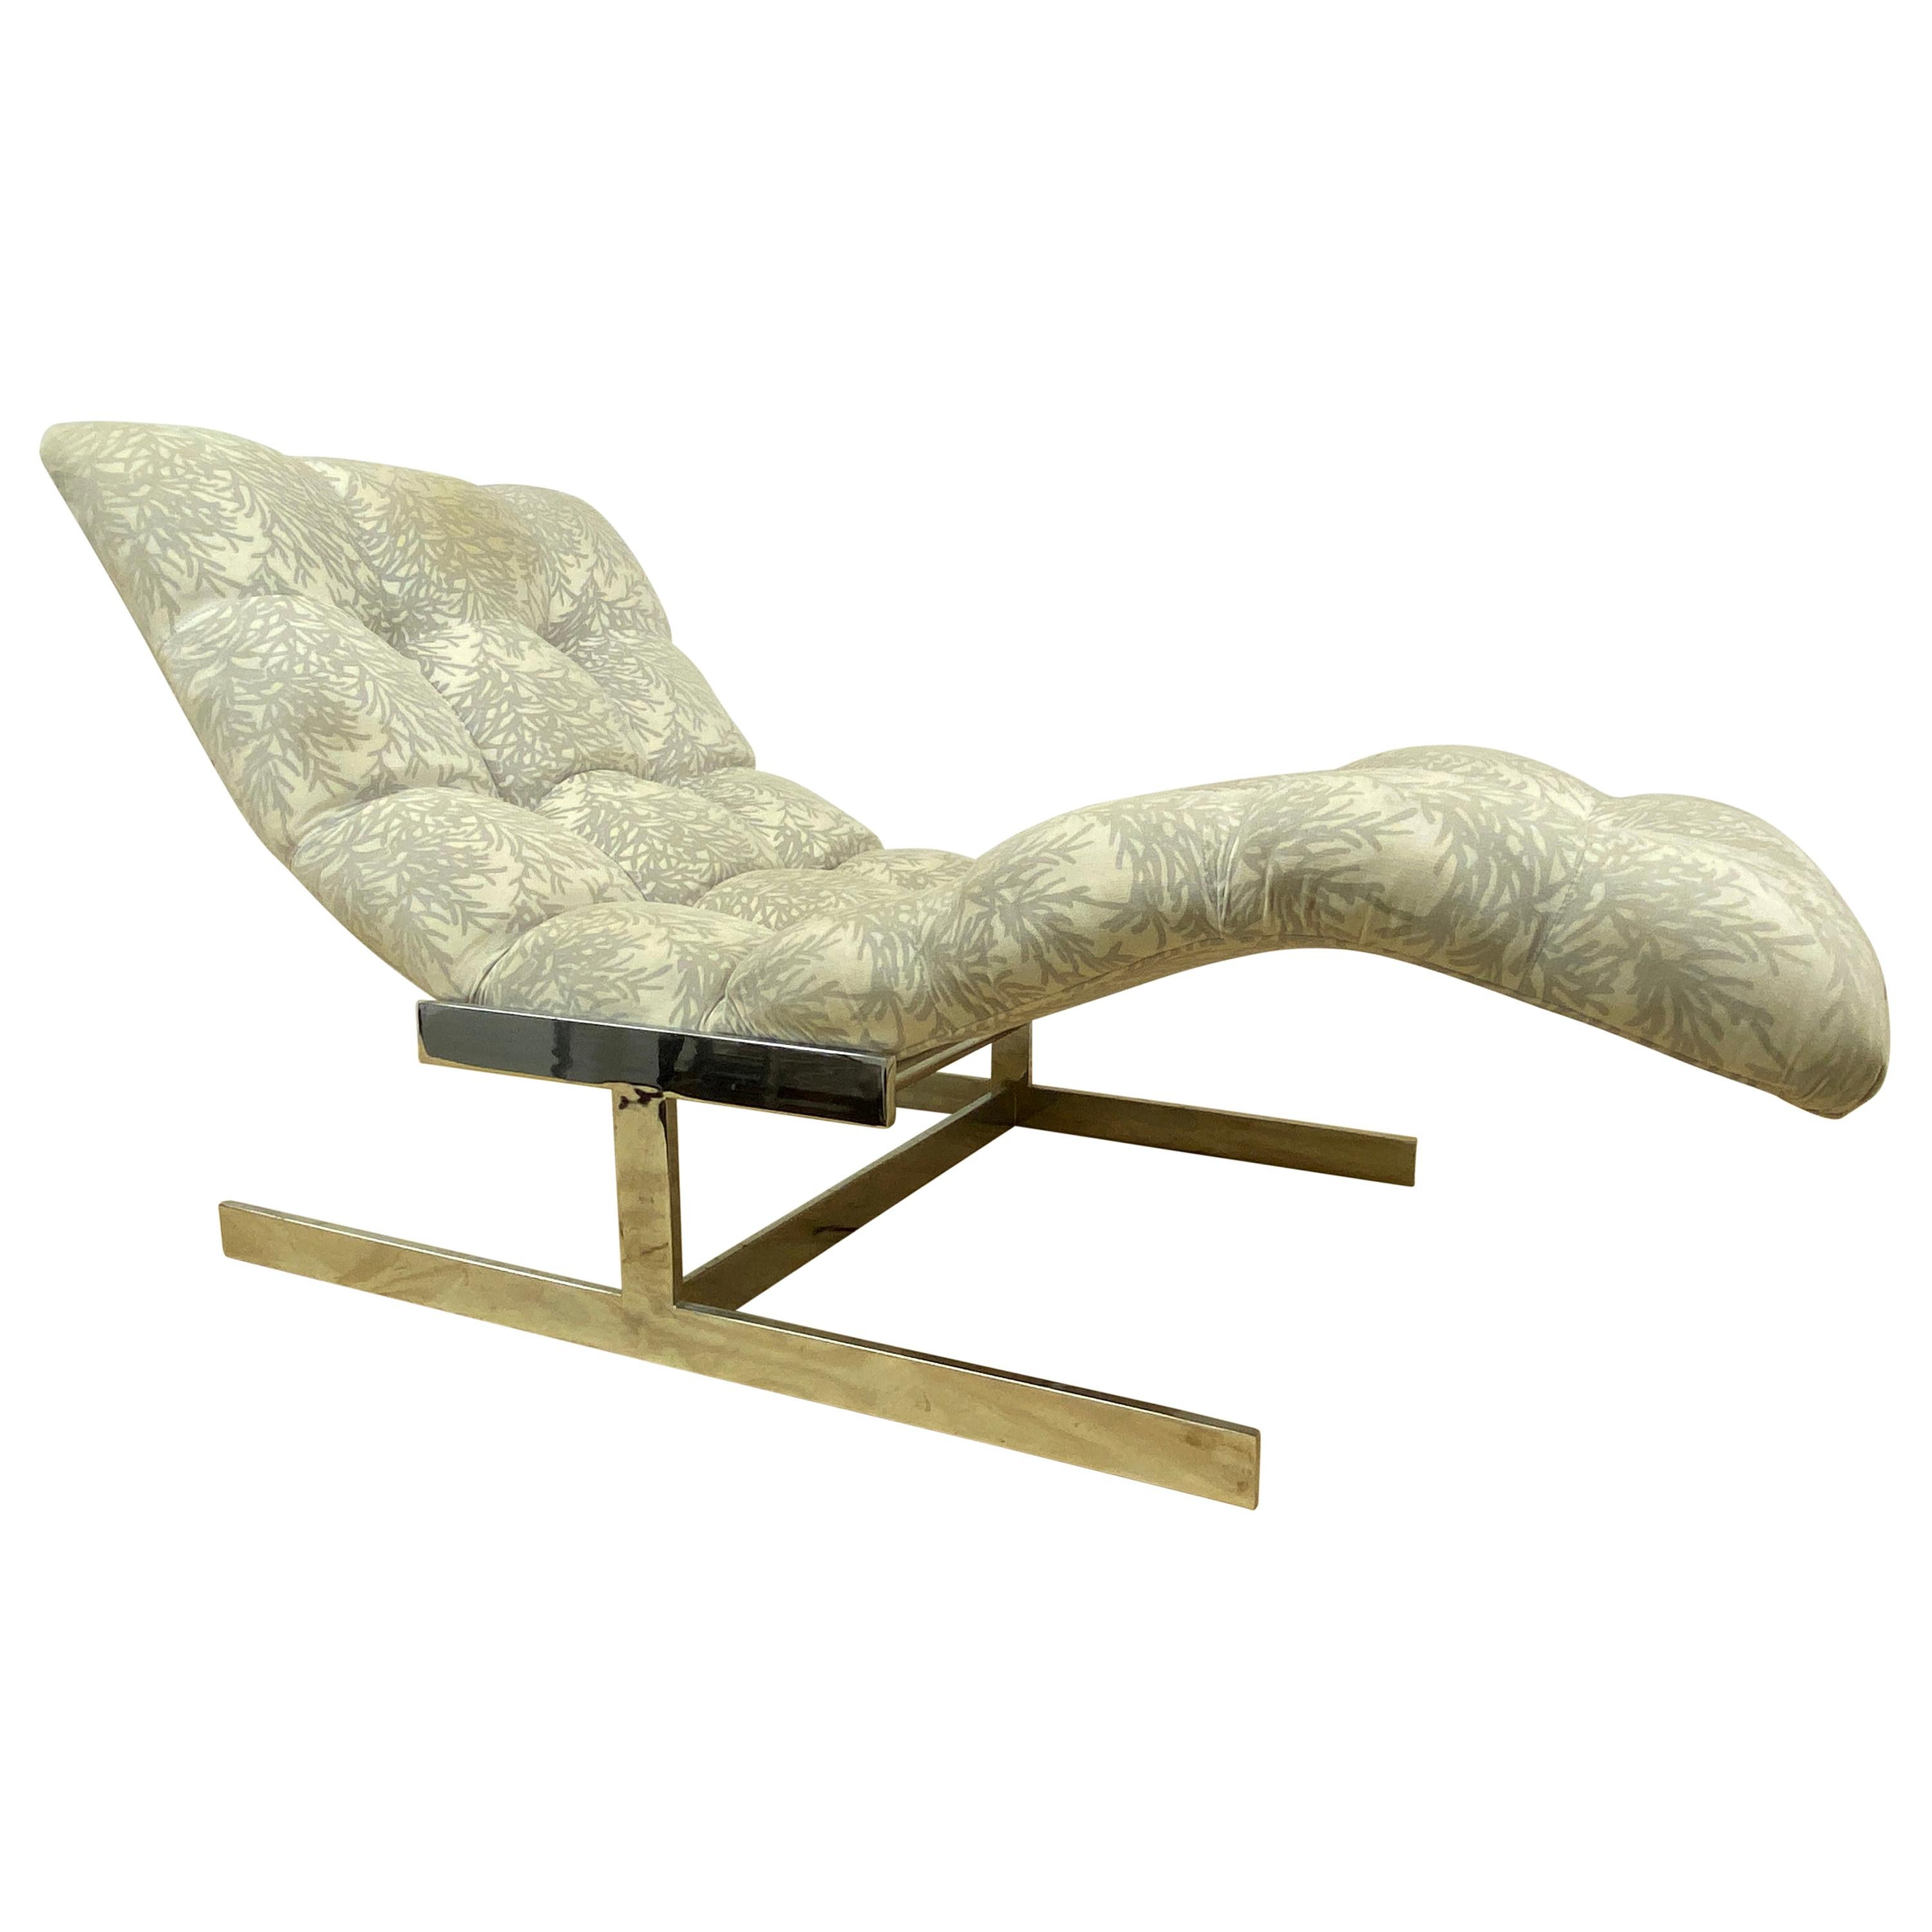 Chaise in Style of Milo Baughman, Upholstery, Metal, 1970s, Mid-Century Modern